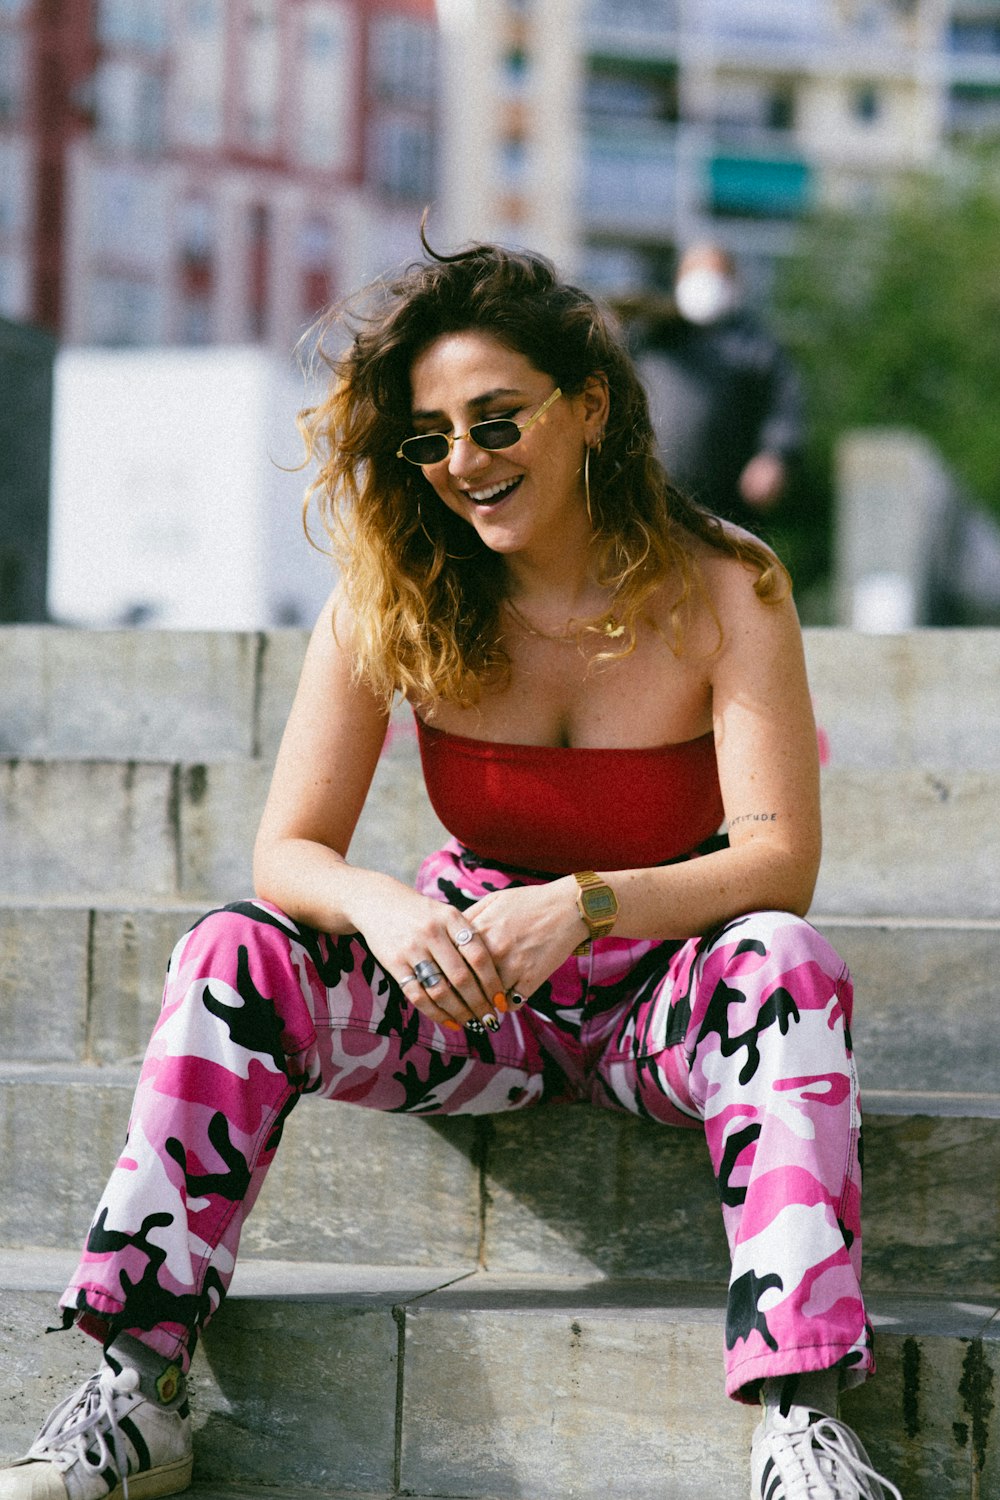 woman in red spaghetti strap top and white and red pants sitting on concrete stairs